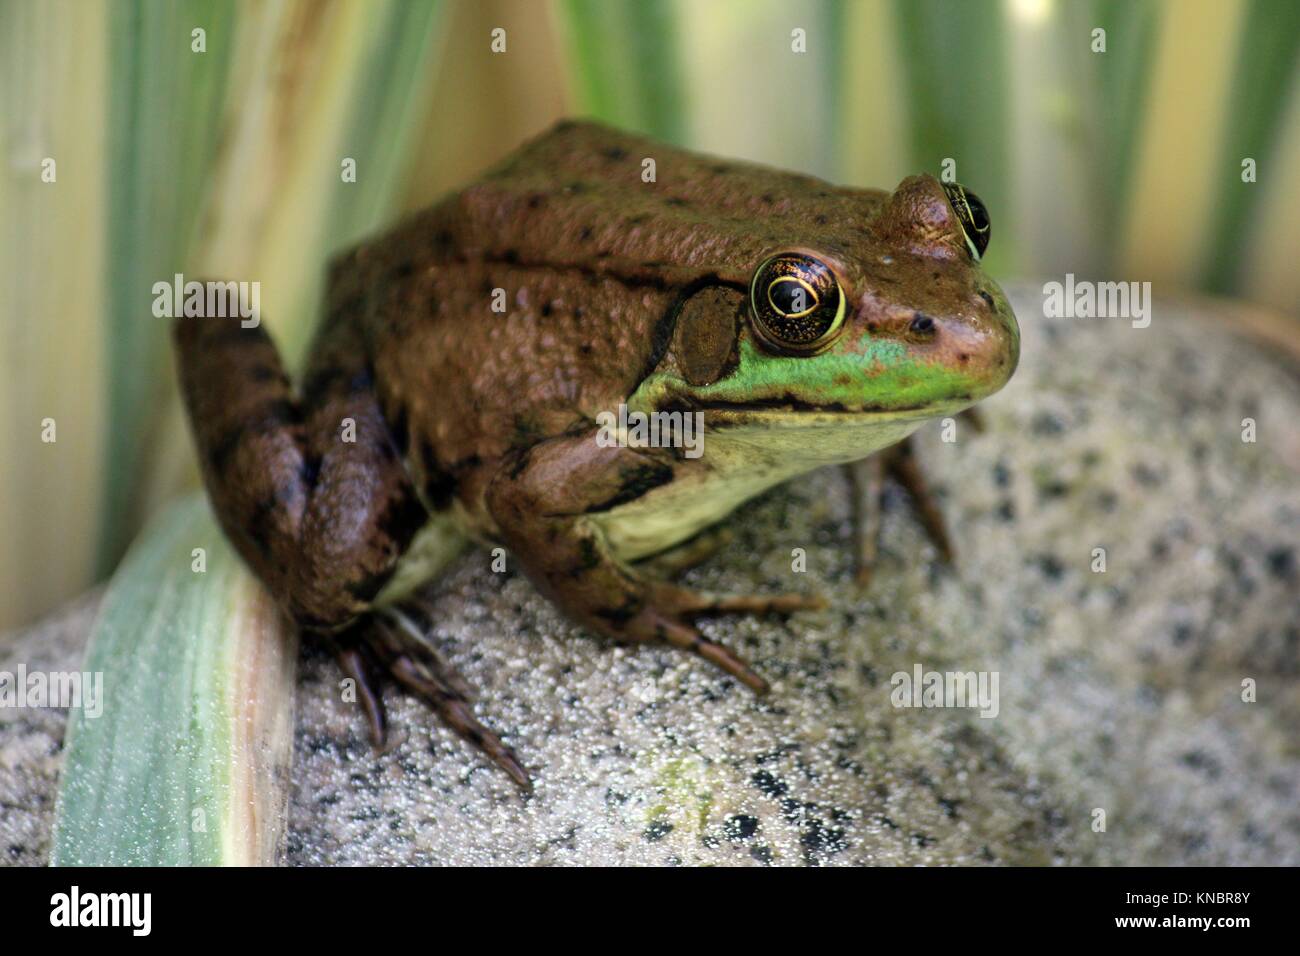 Close up of an American Bullfrog, Lithobates catesbeianus, sitting on a rock using a bokeh effect. Stock Photo